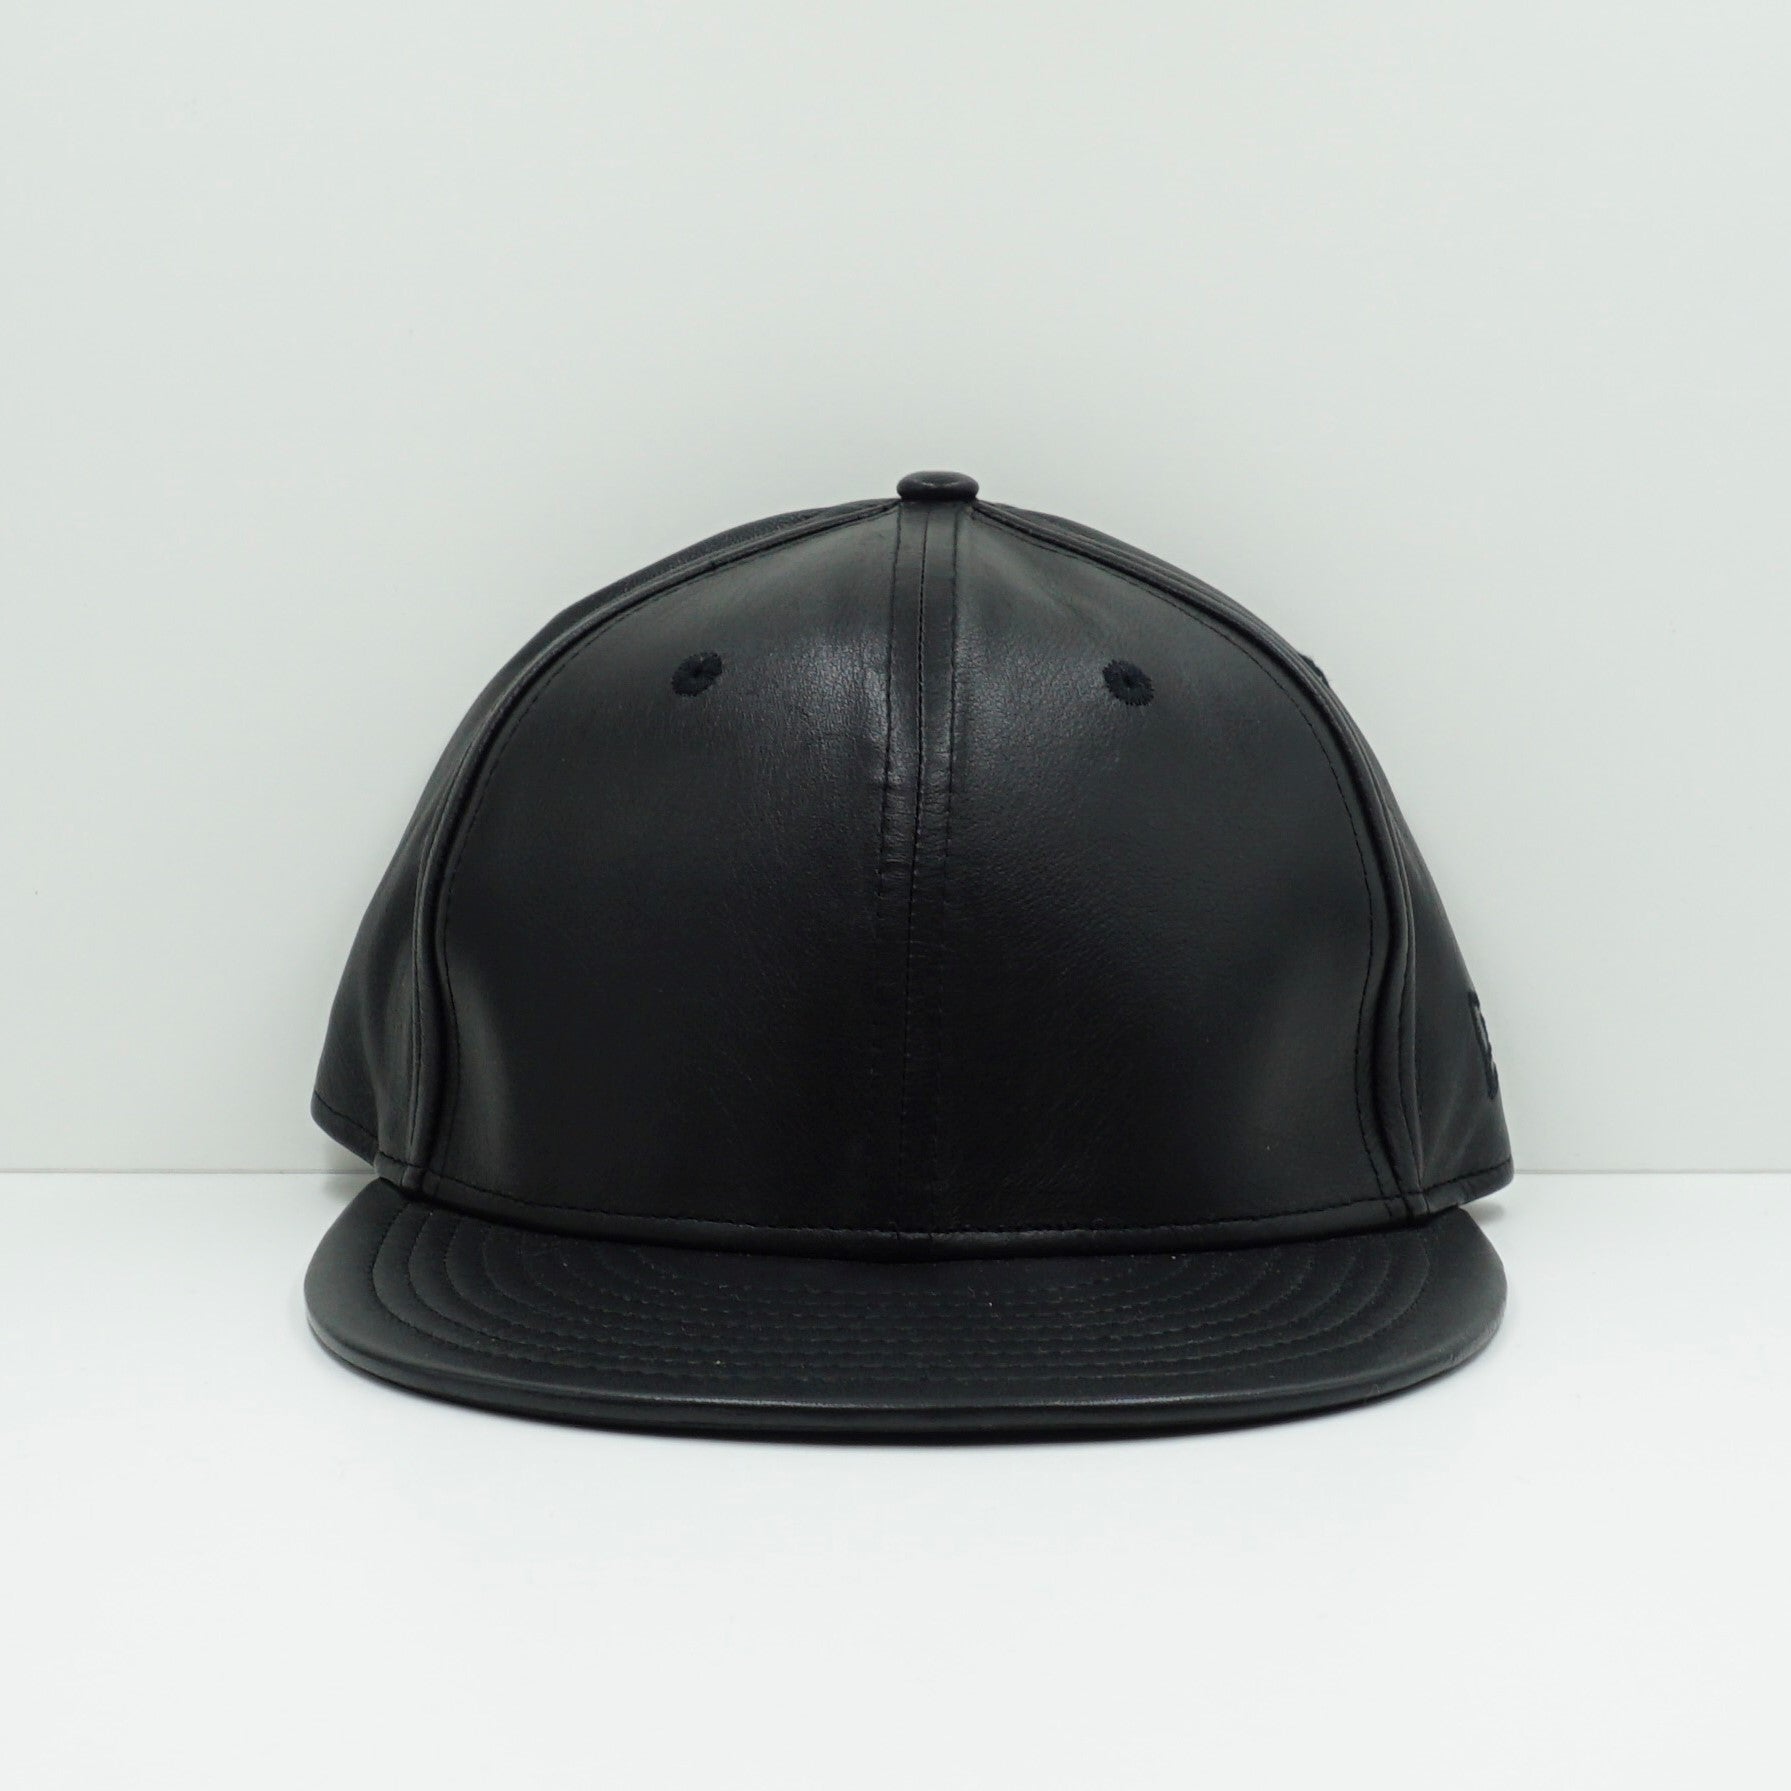 New Era Black Leather Fitted Cap